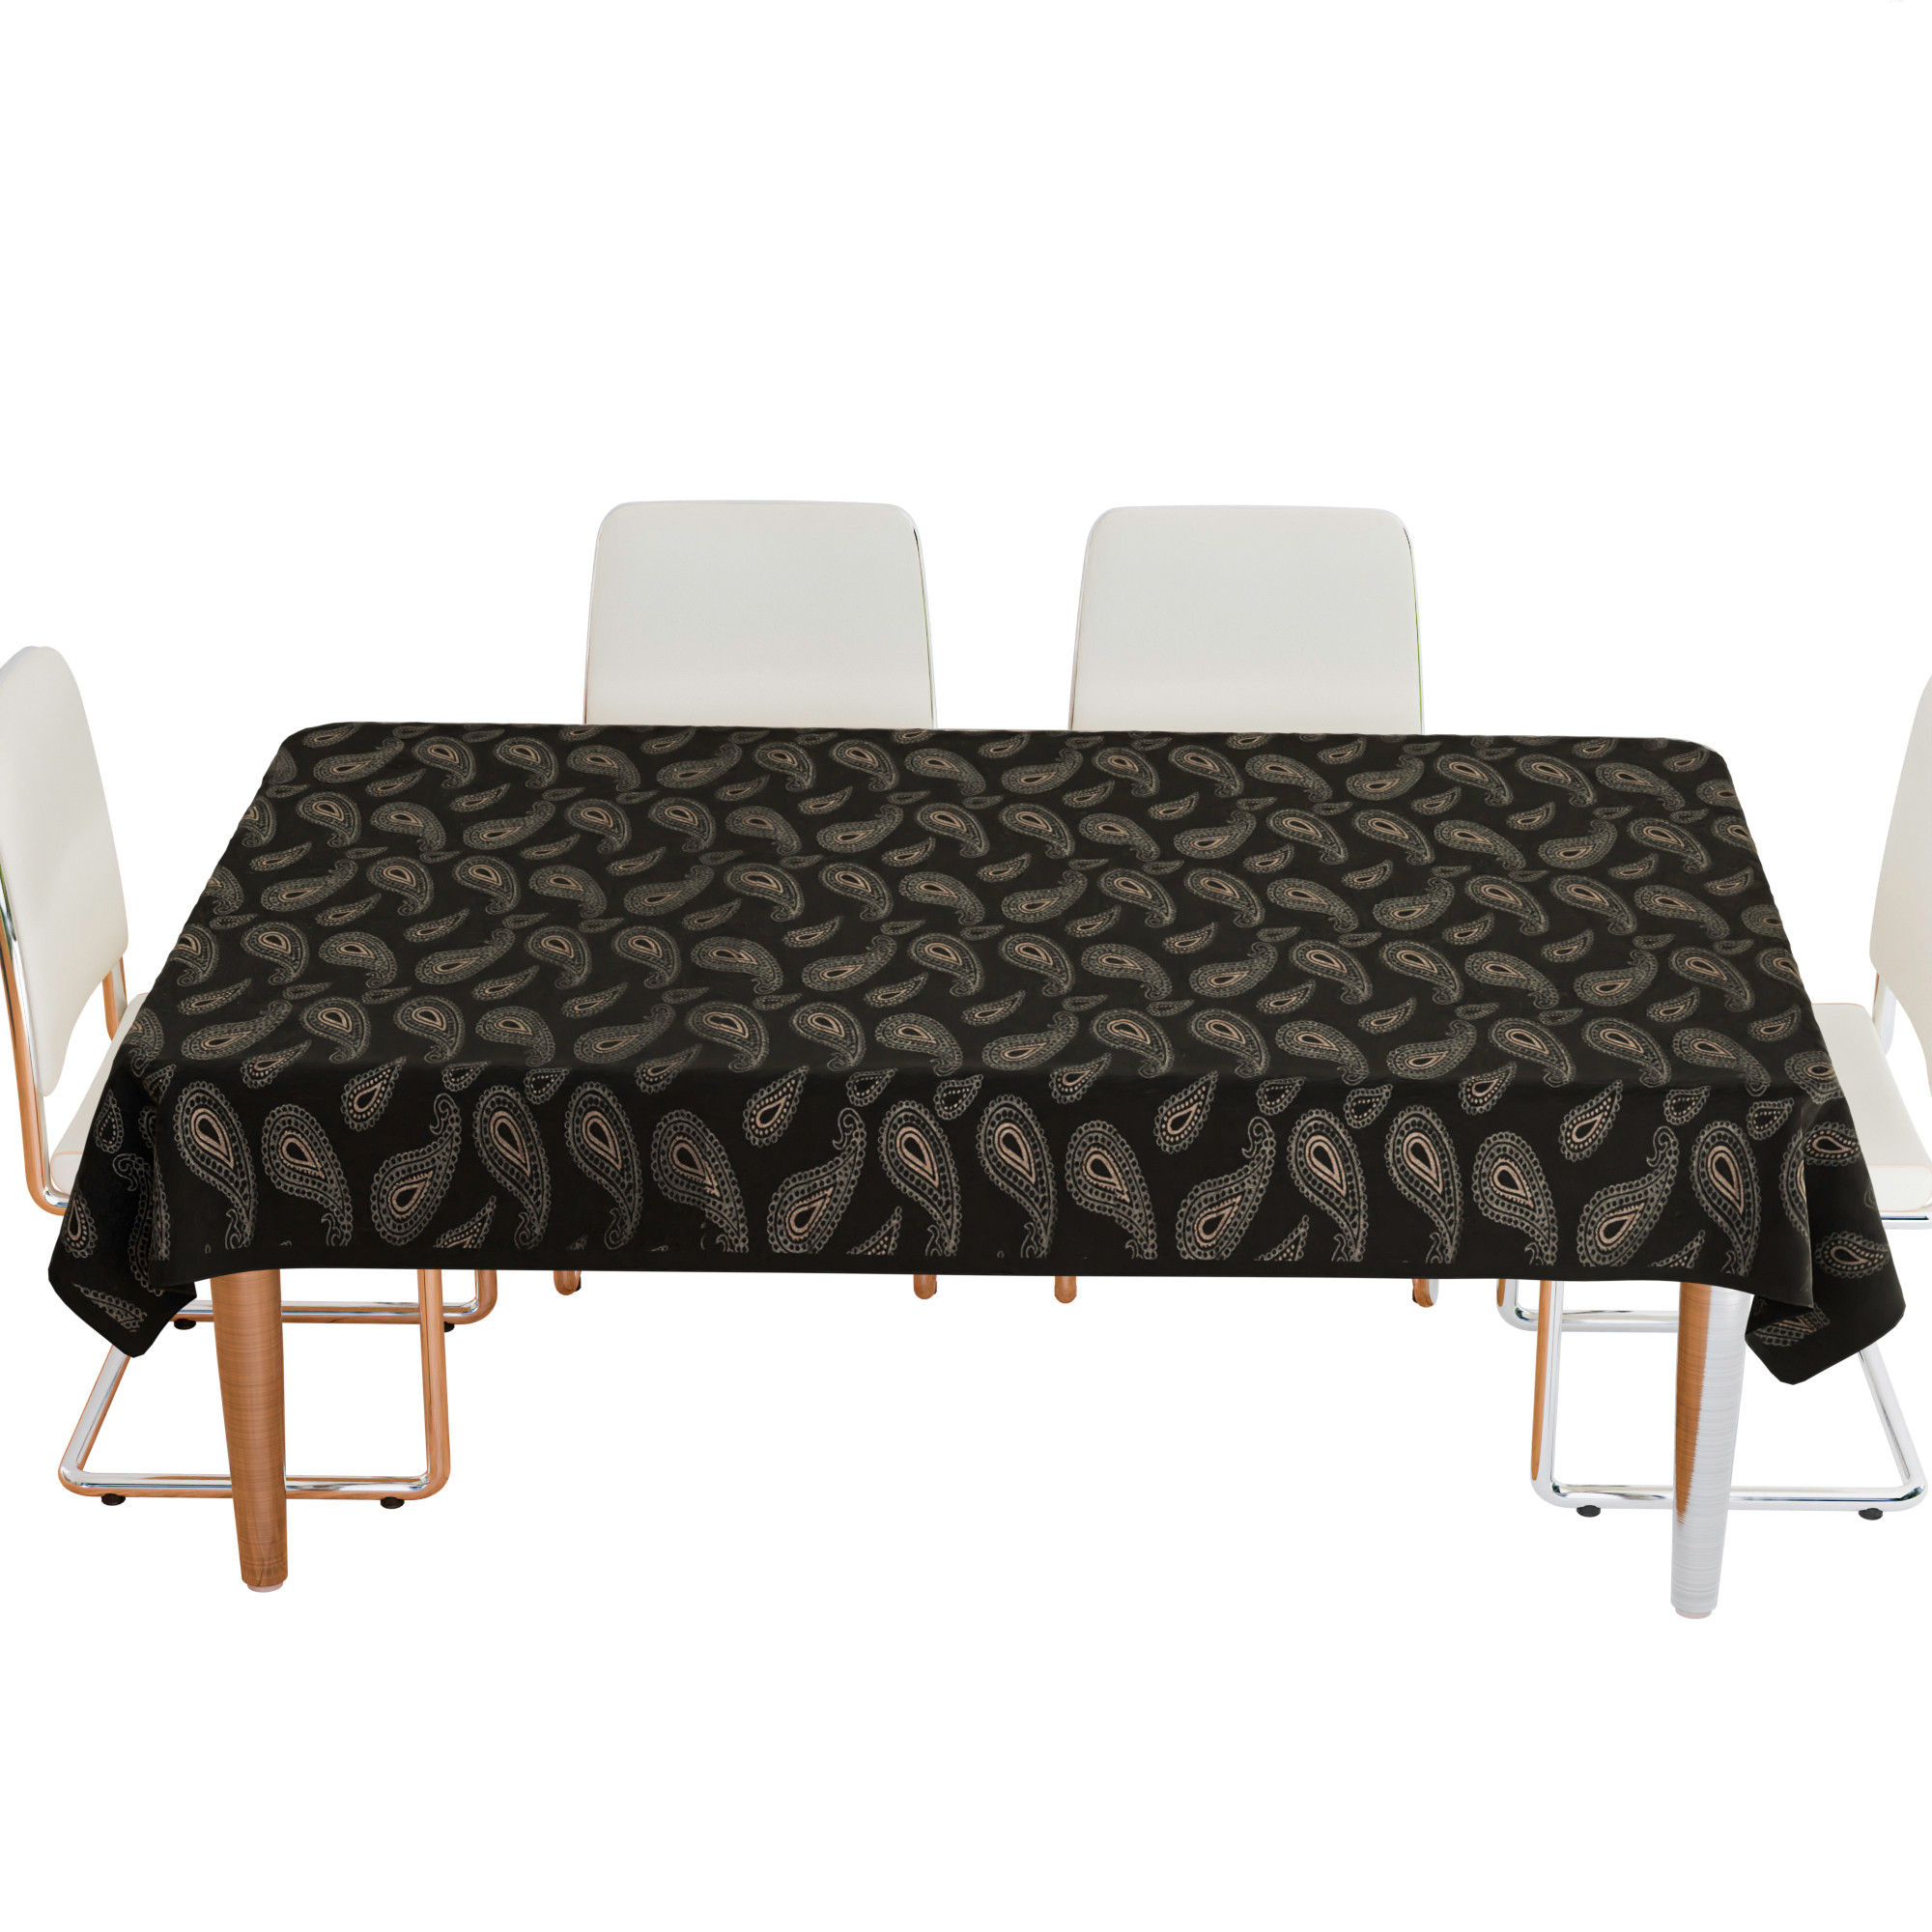 Kuber Industries Dining Table Cover | 6-Seater Table Cover | Cotton Table Protector Cover | Table Cover for Kitchen | Table Cover for Hall Décor | Carry-Design | 60x90 Inch | DTC | Black